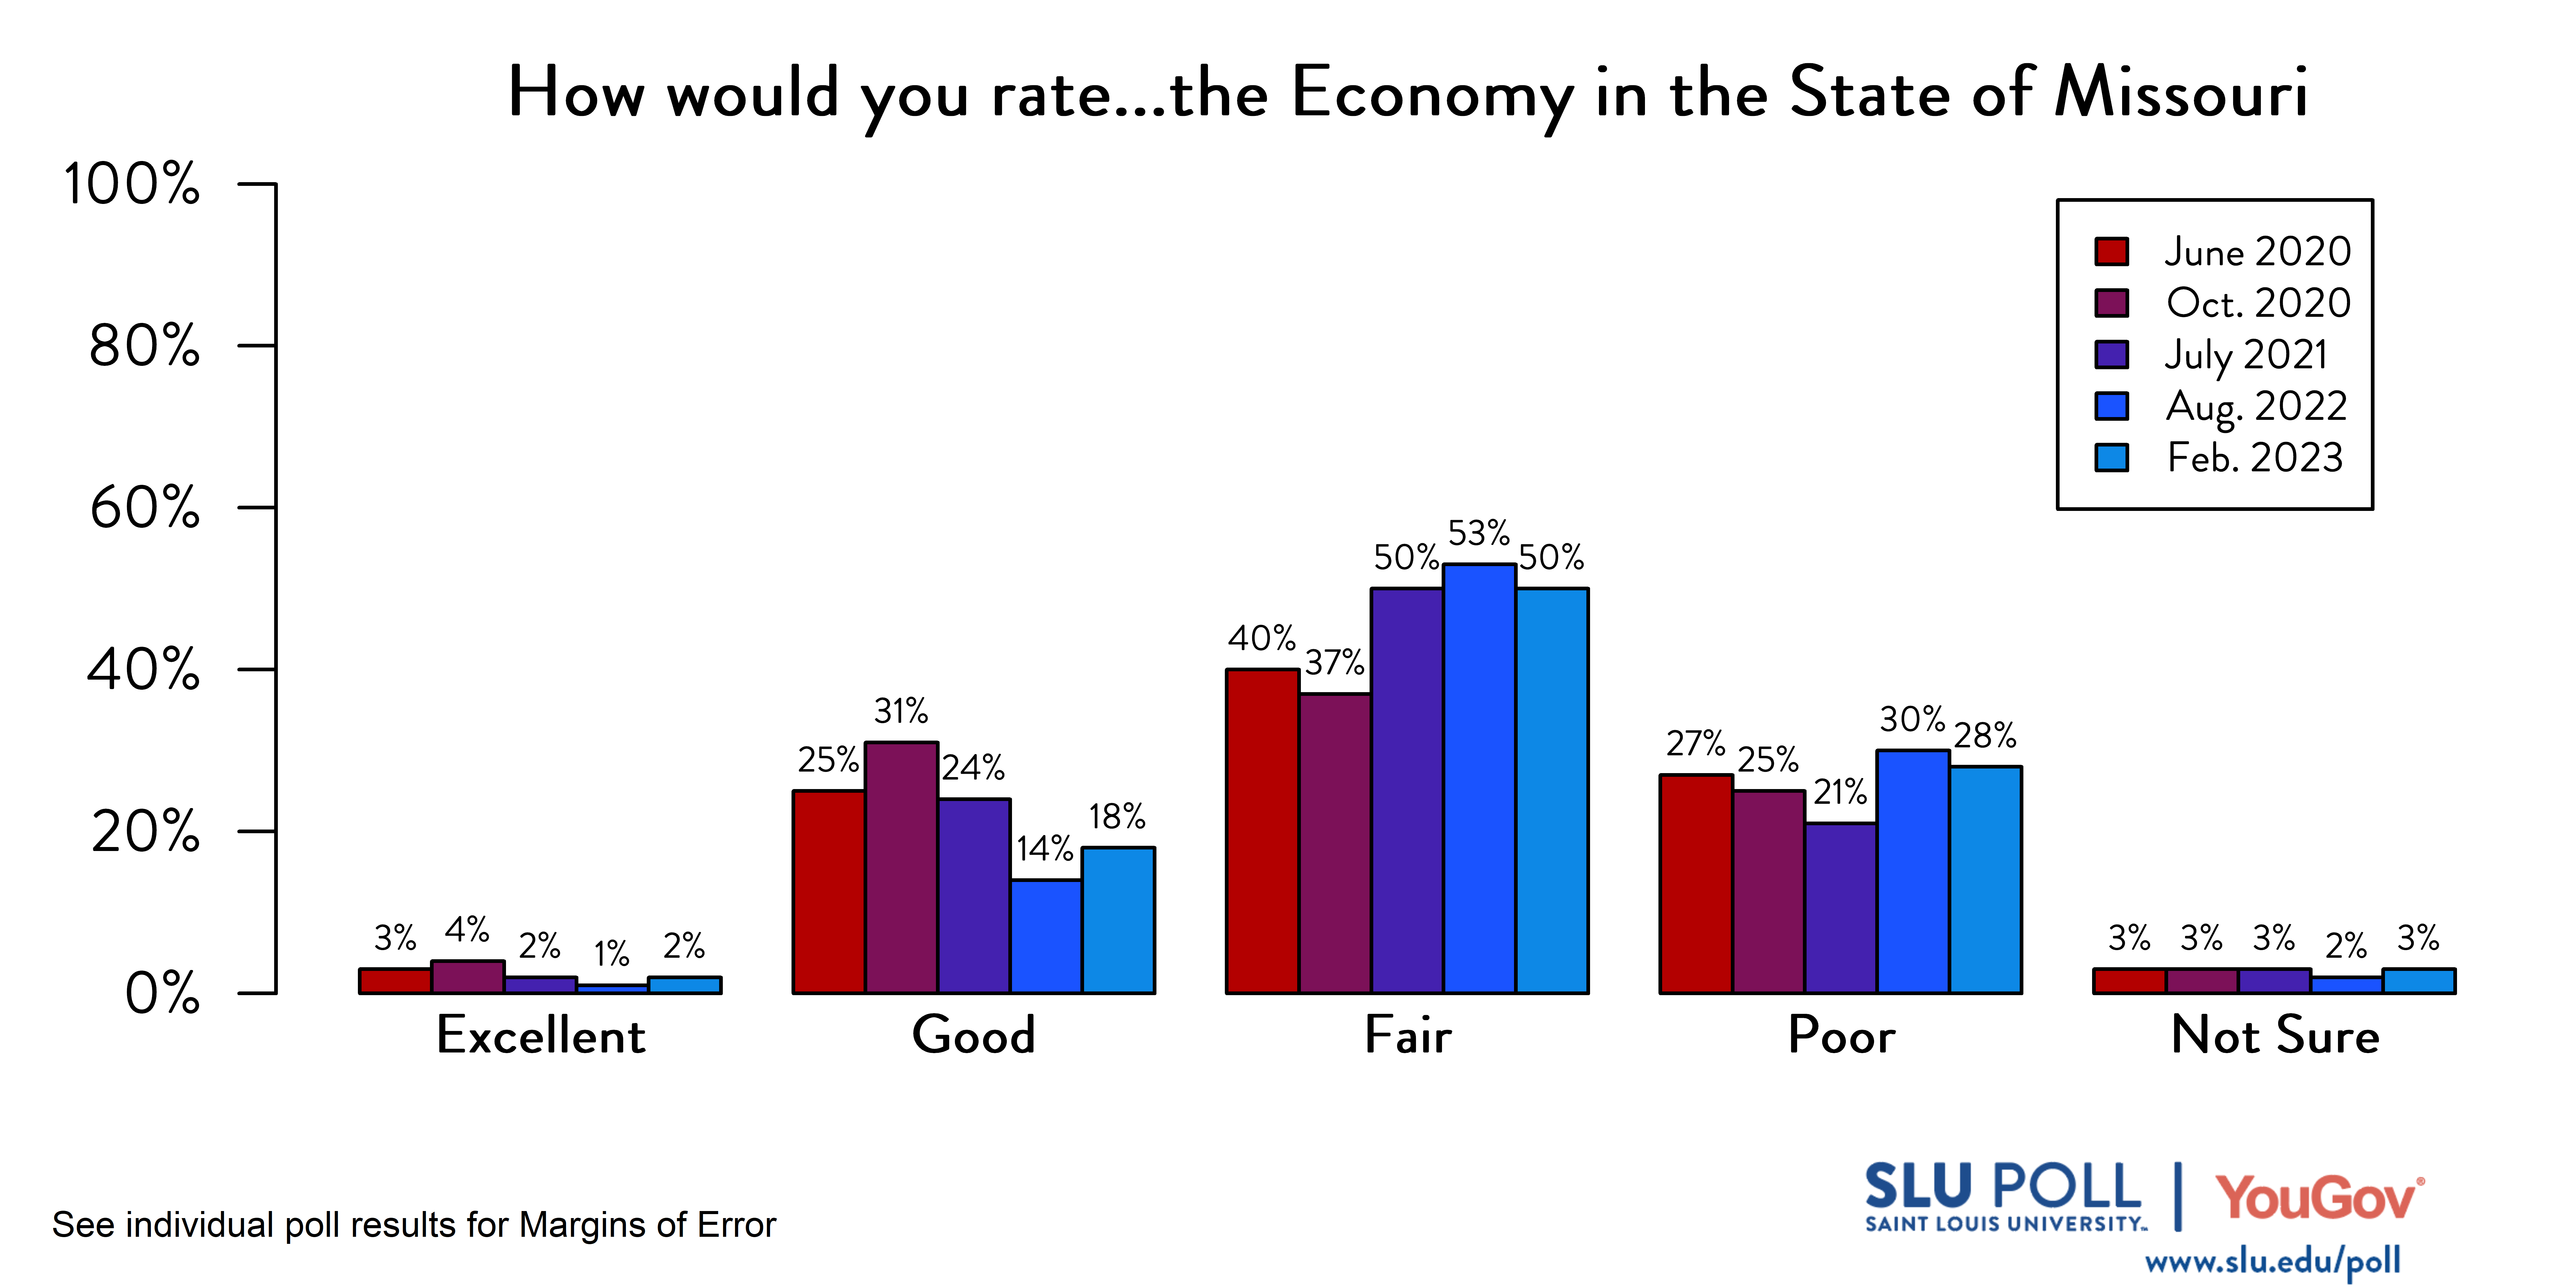 Likely voters' responses to 'How would you rate the condition of the following: The Economy in the State of Missouri?'. June 2020 Voter Responses 3% Excellent, 25% Good, 40% Fair, 27% Poor, and 3% Not Sure. October 2020 Voter Responses: 4% Excellent, 31% Good, 37% Fair, 25% Poor, and 3% Not sure. July 2021 Voter Responses: 2% Excellent, 24% Good, 50% Fair, 21% Poor, and 3% Not sure. August 2022 Voter Responses: 1% Excellent, 14% Good, 53% Fair, 30% Poor, and 2% Not sure. Februrary 2023 Voter Responses: 2% Excellent, 18% Good, 50% Fair, 28% Poor, and 3% Not sure.